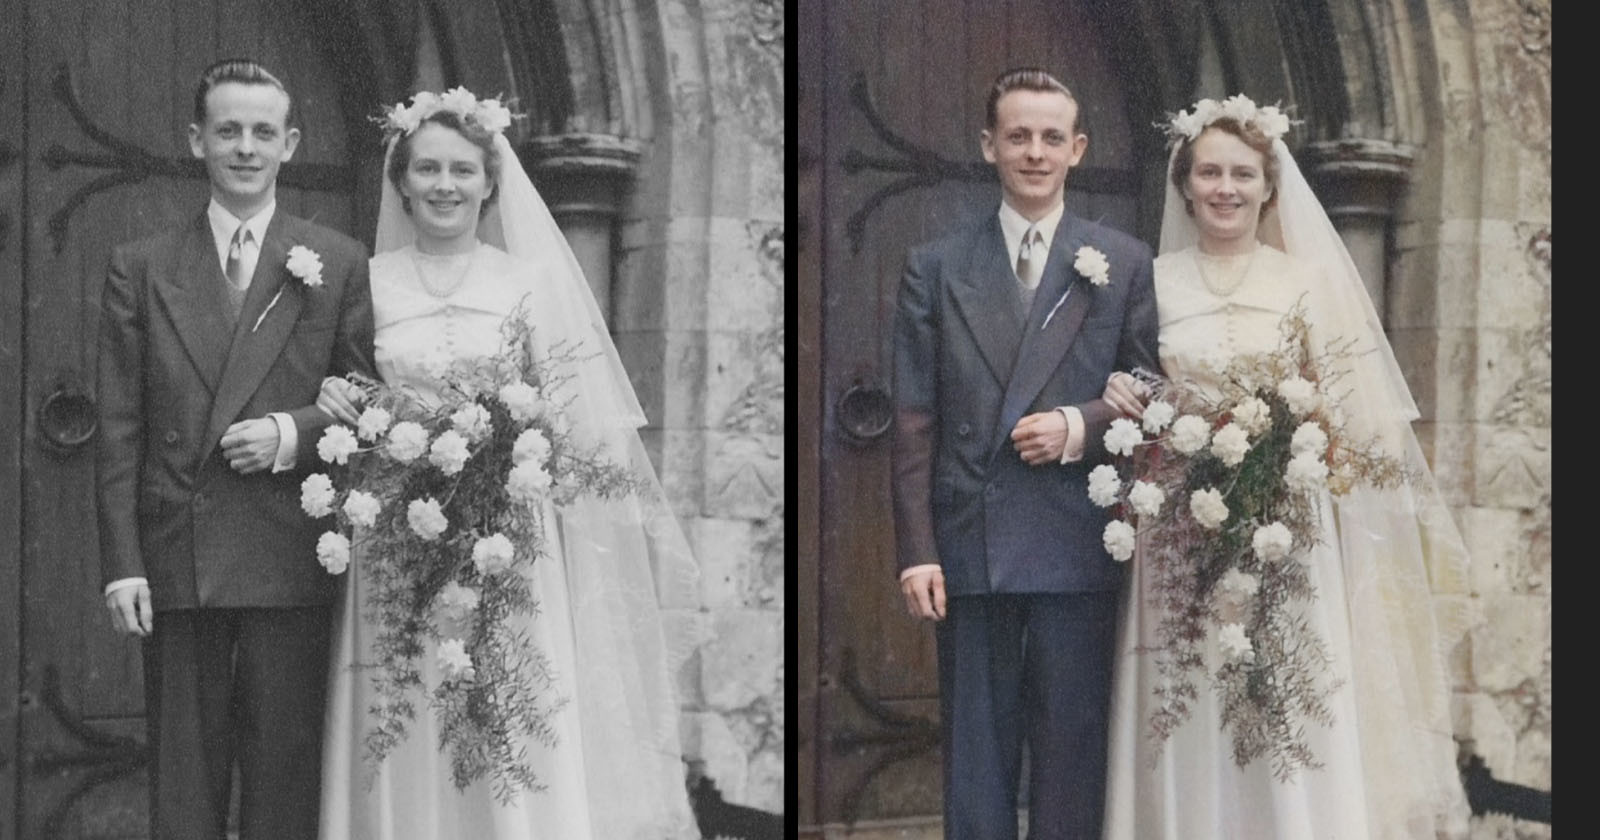  ancestry now lets automatically colorize historical photos 